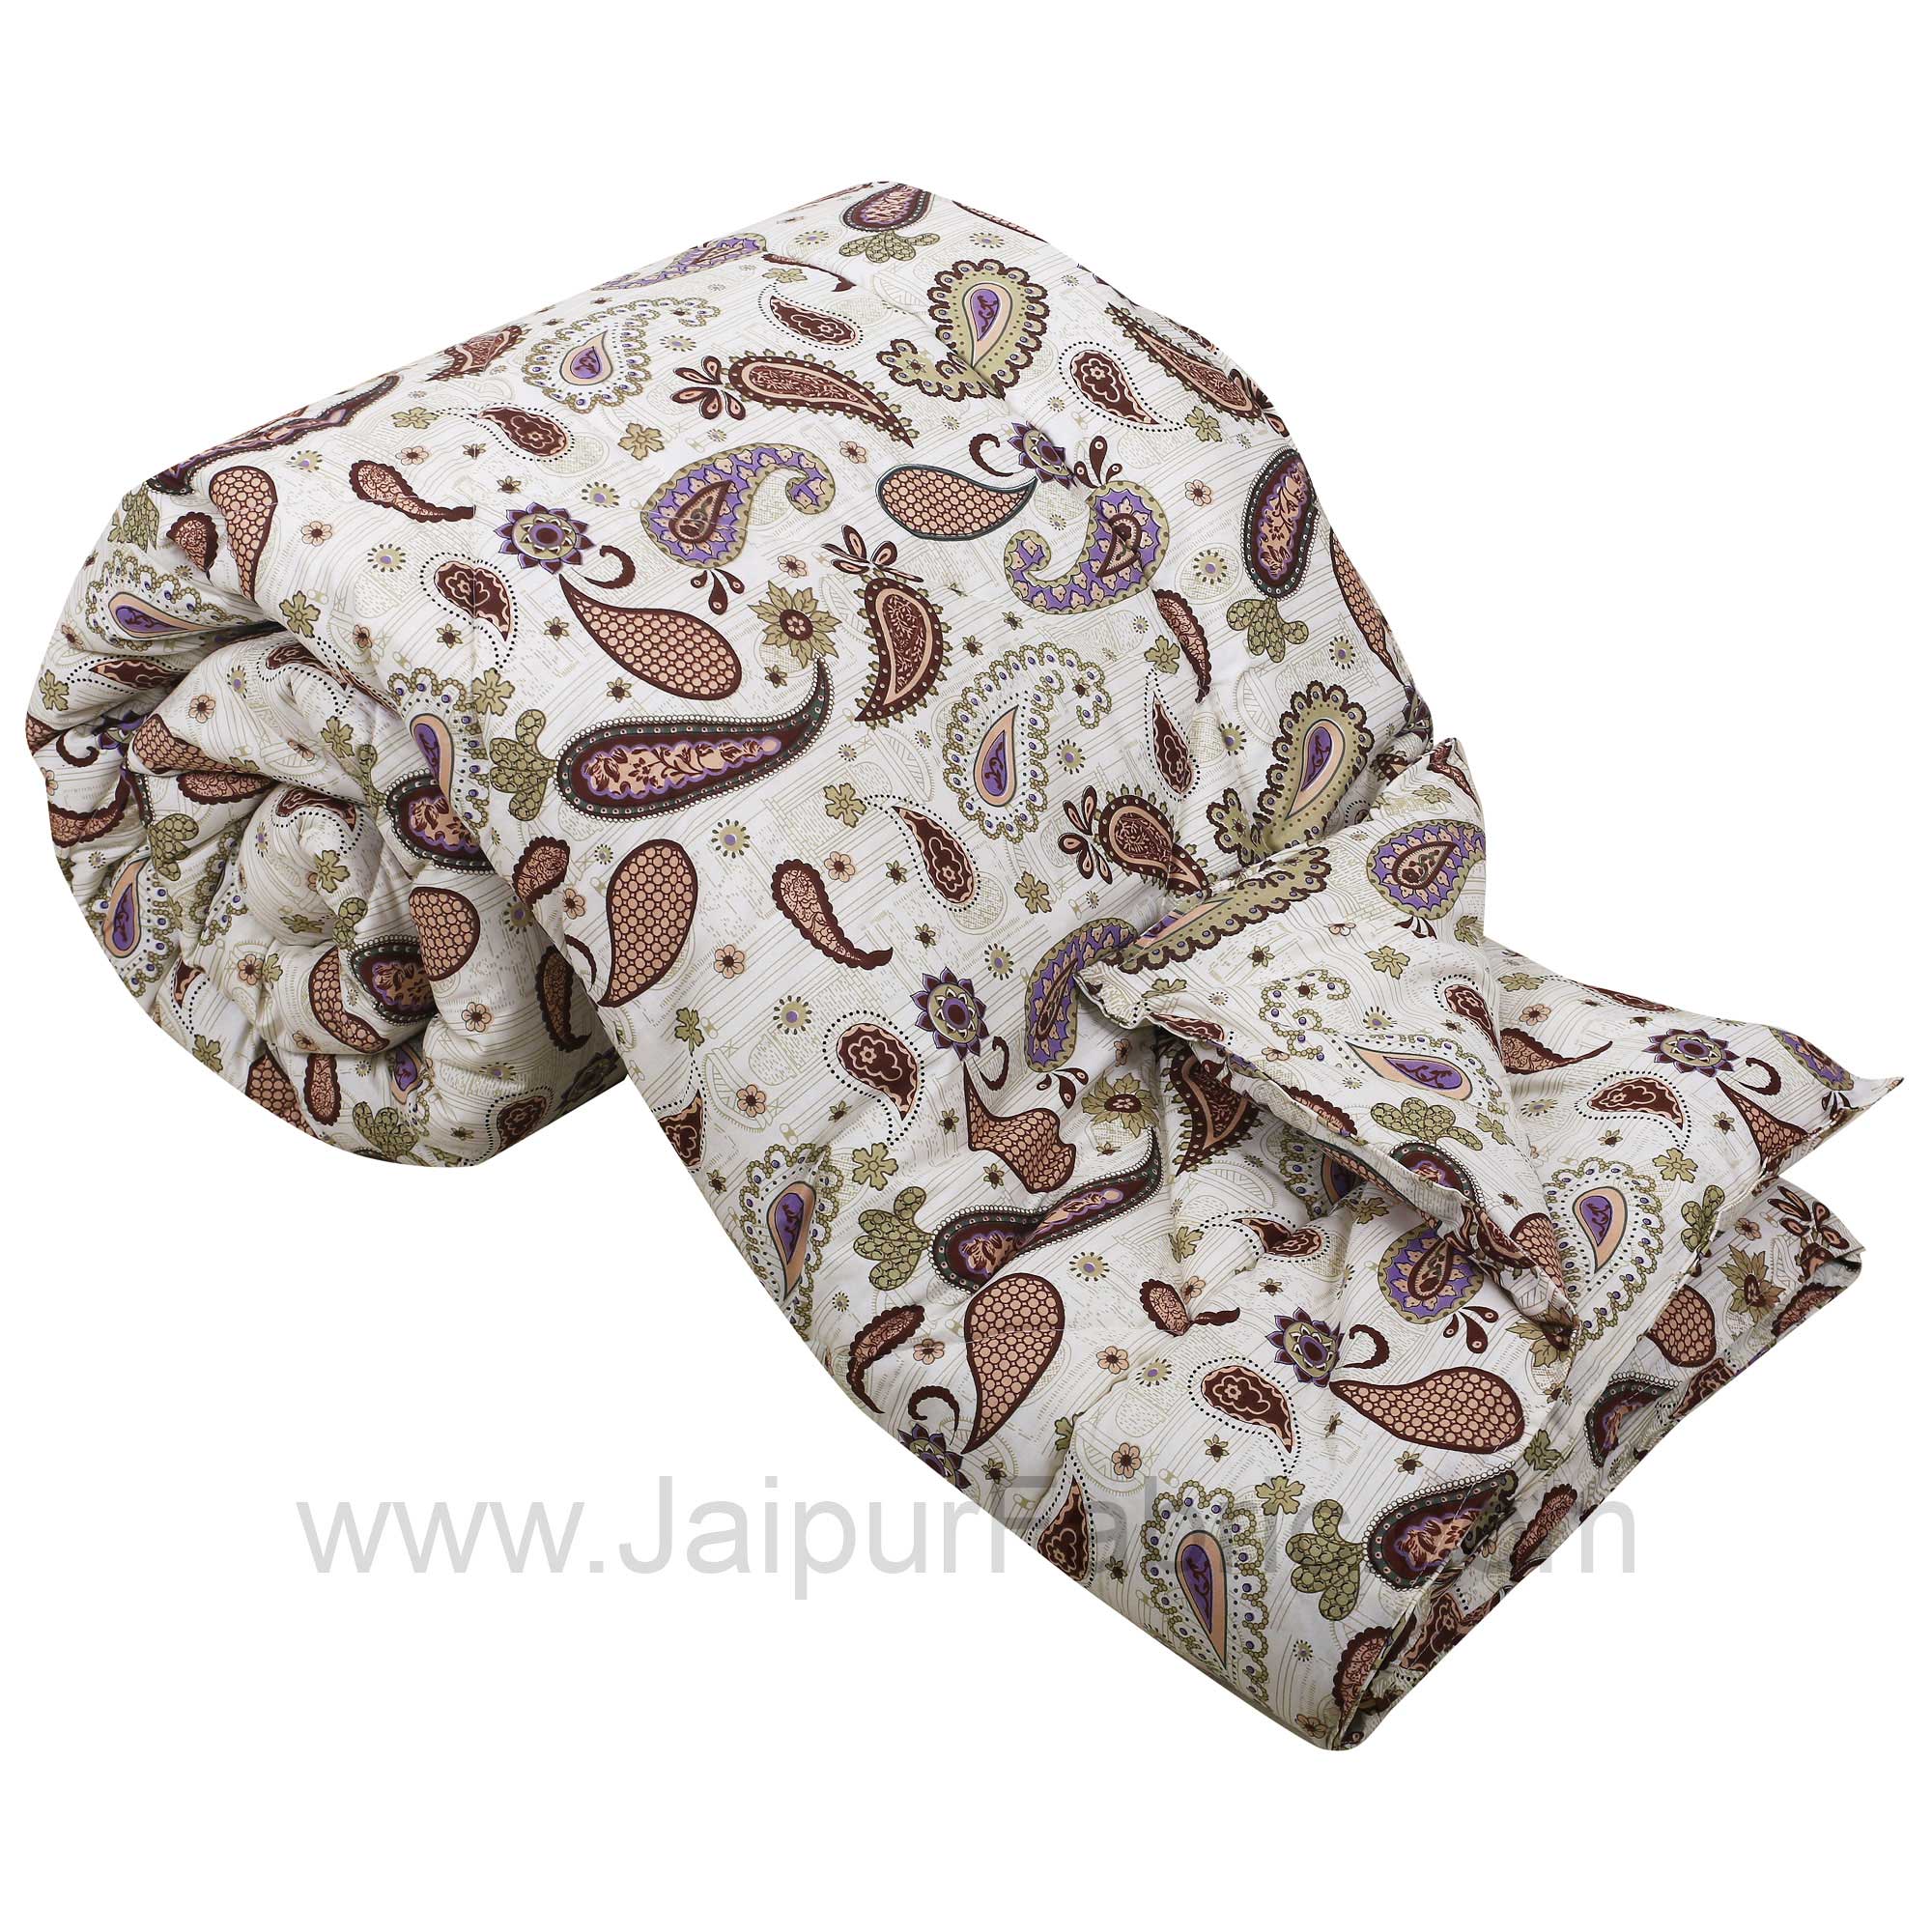 Paisley Creamish Pink Double Bed Comforter